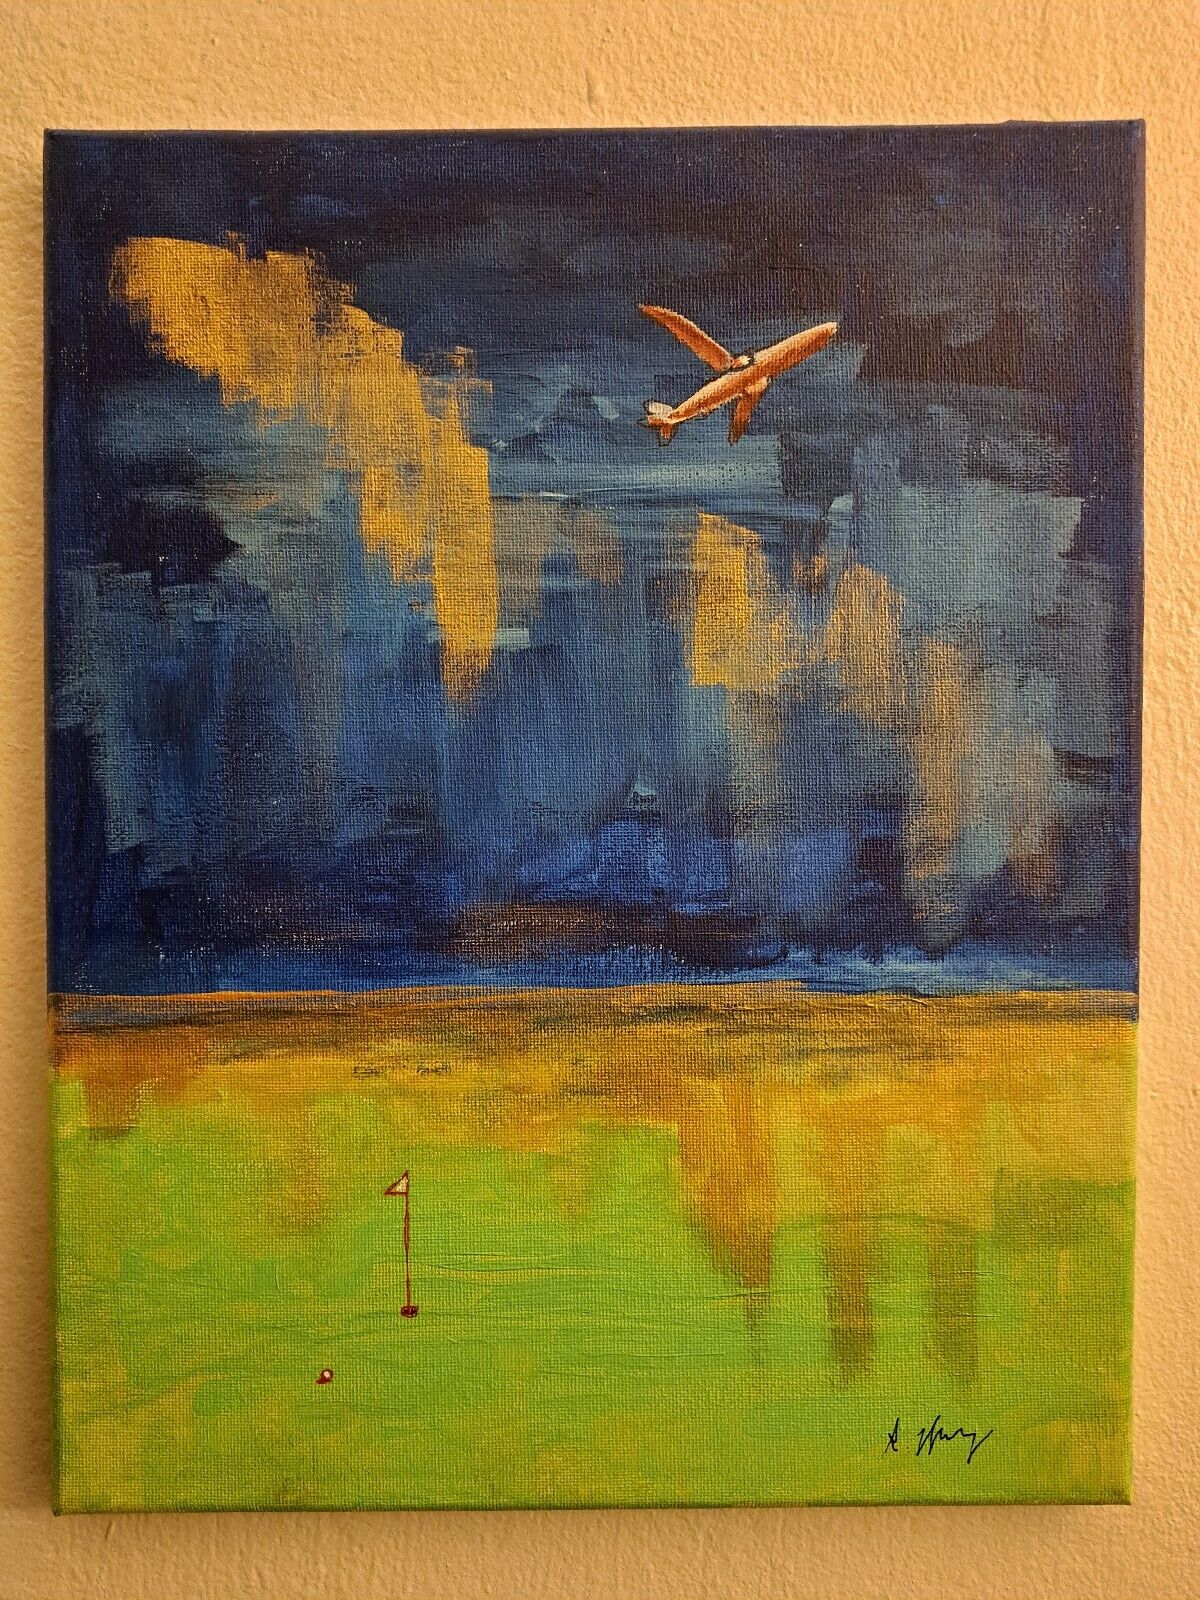 HOKi-Painting of Golf Course & Airplane, Blue & Green Wall deco 14x11,SIGNED&#